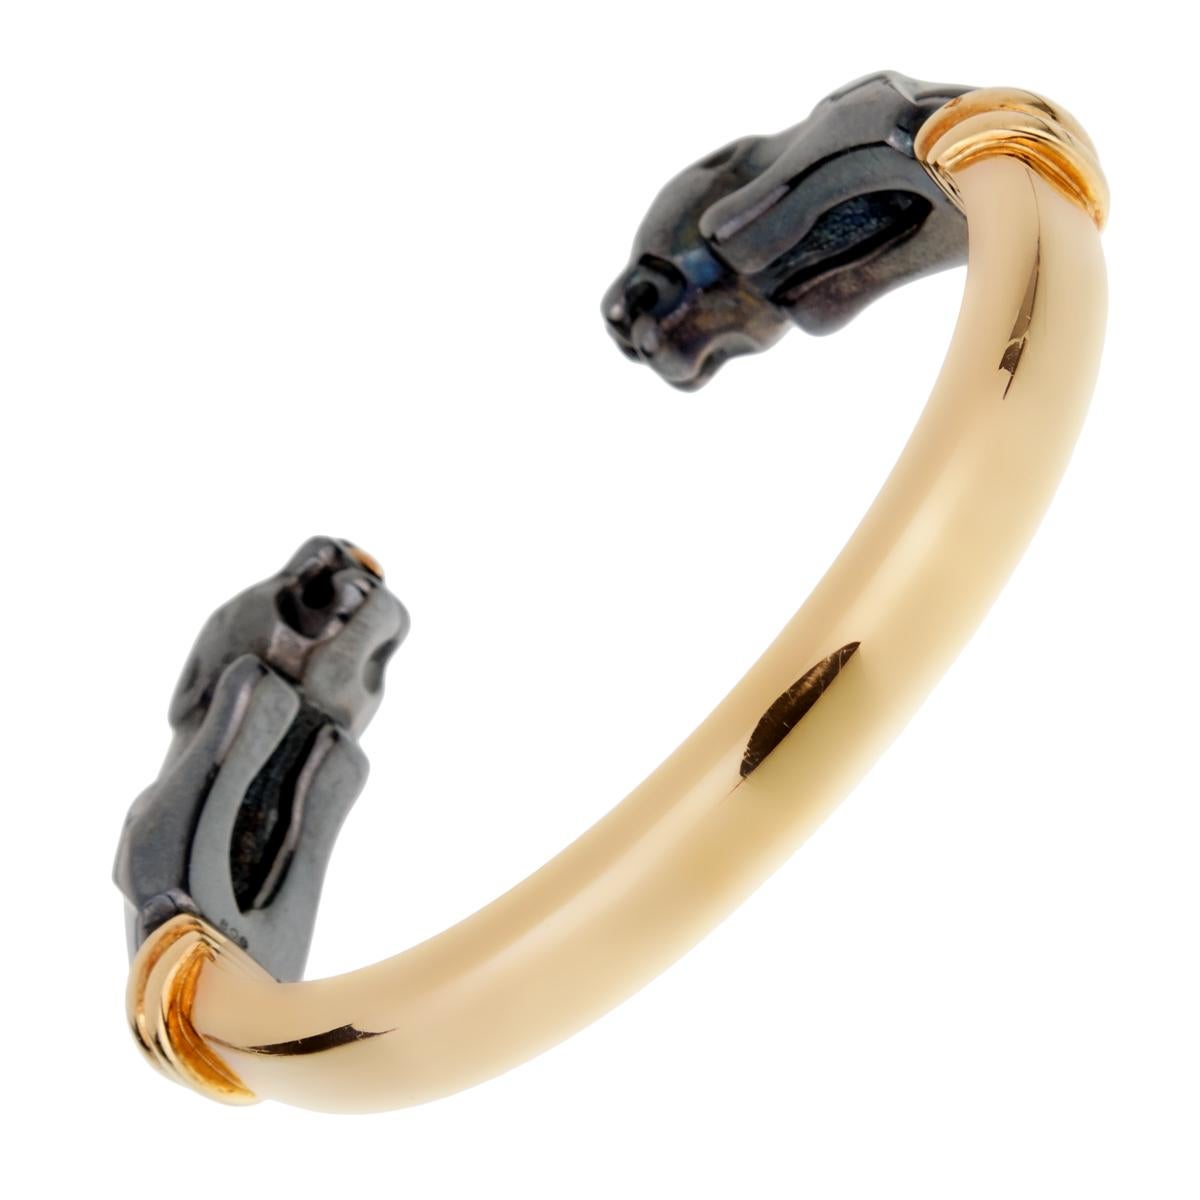 An 18k yellow gold and hematite cuff bracelet from the Panthere de Cartier collection. The bracelet is composed of 2 hematite Panther heads facing each other with 18k yellow gold eyes.